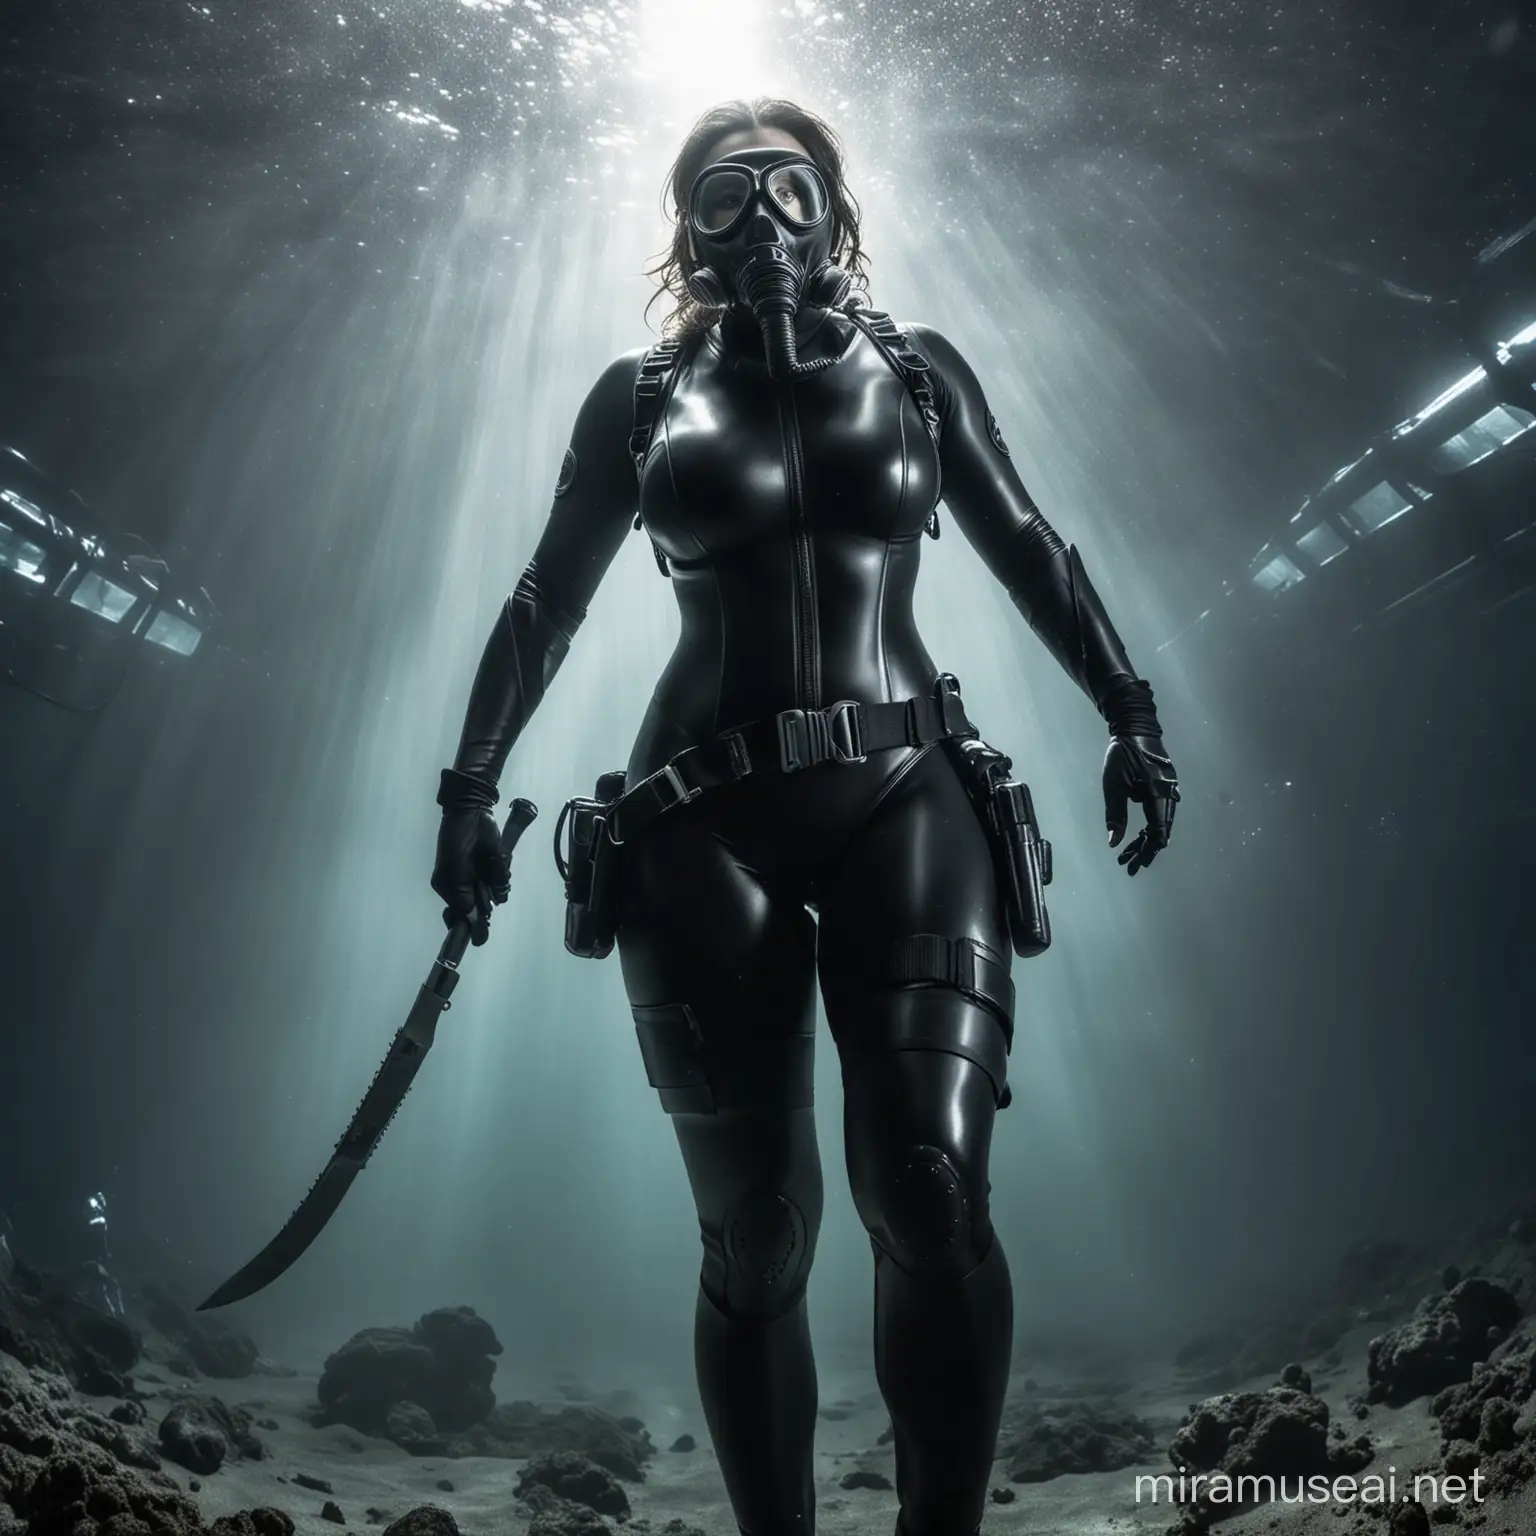 first person view from from view ground level, looking up at a sexy curvy female scuba diver in full body spandex, standing sexy pose, big breast, wearing a gas mask, upset face, she holds a knife in one hand.